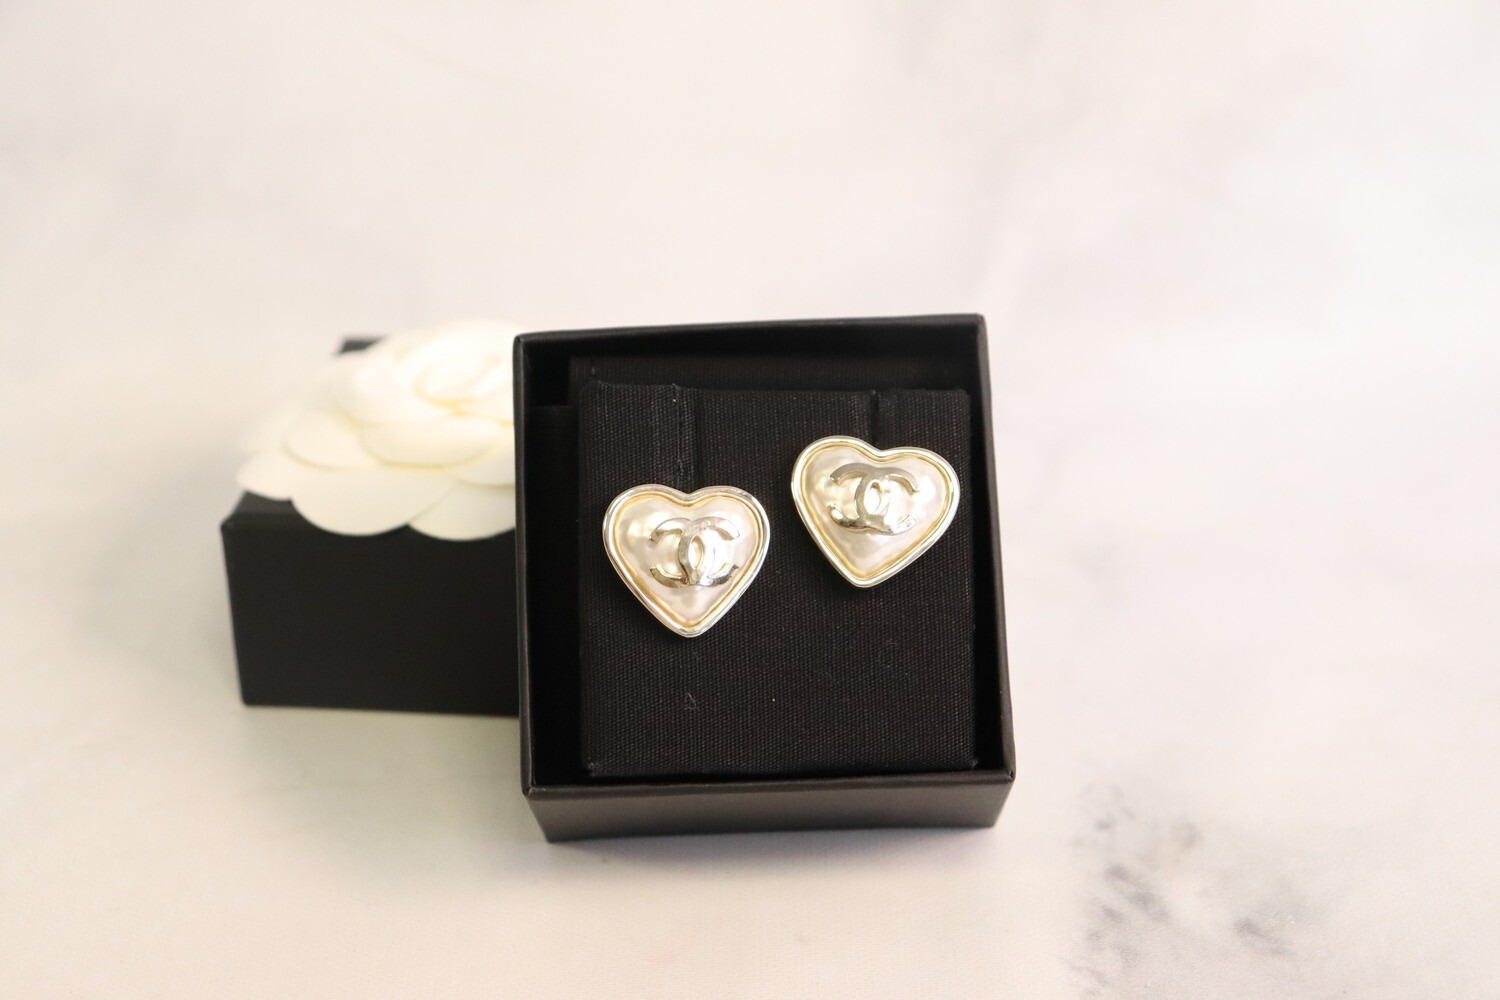 Chanel Earrings Heart Pearl Tone and Gold Outline, New in Box WA001